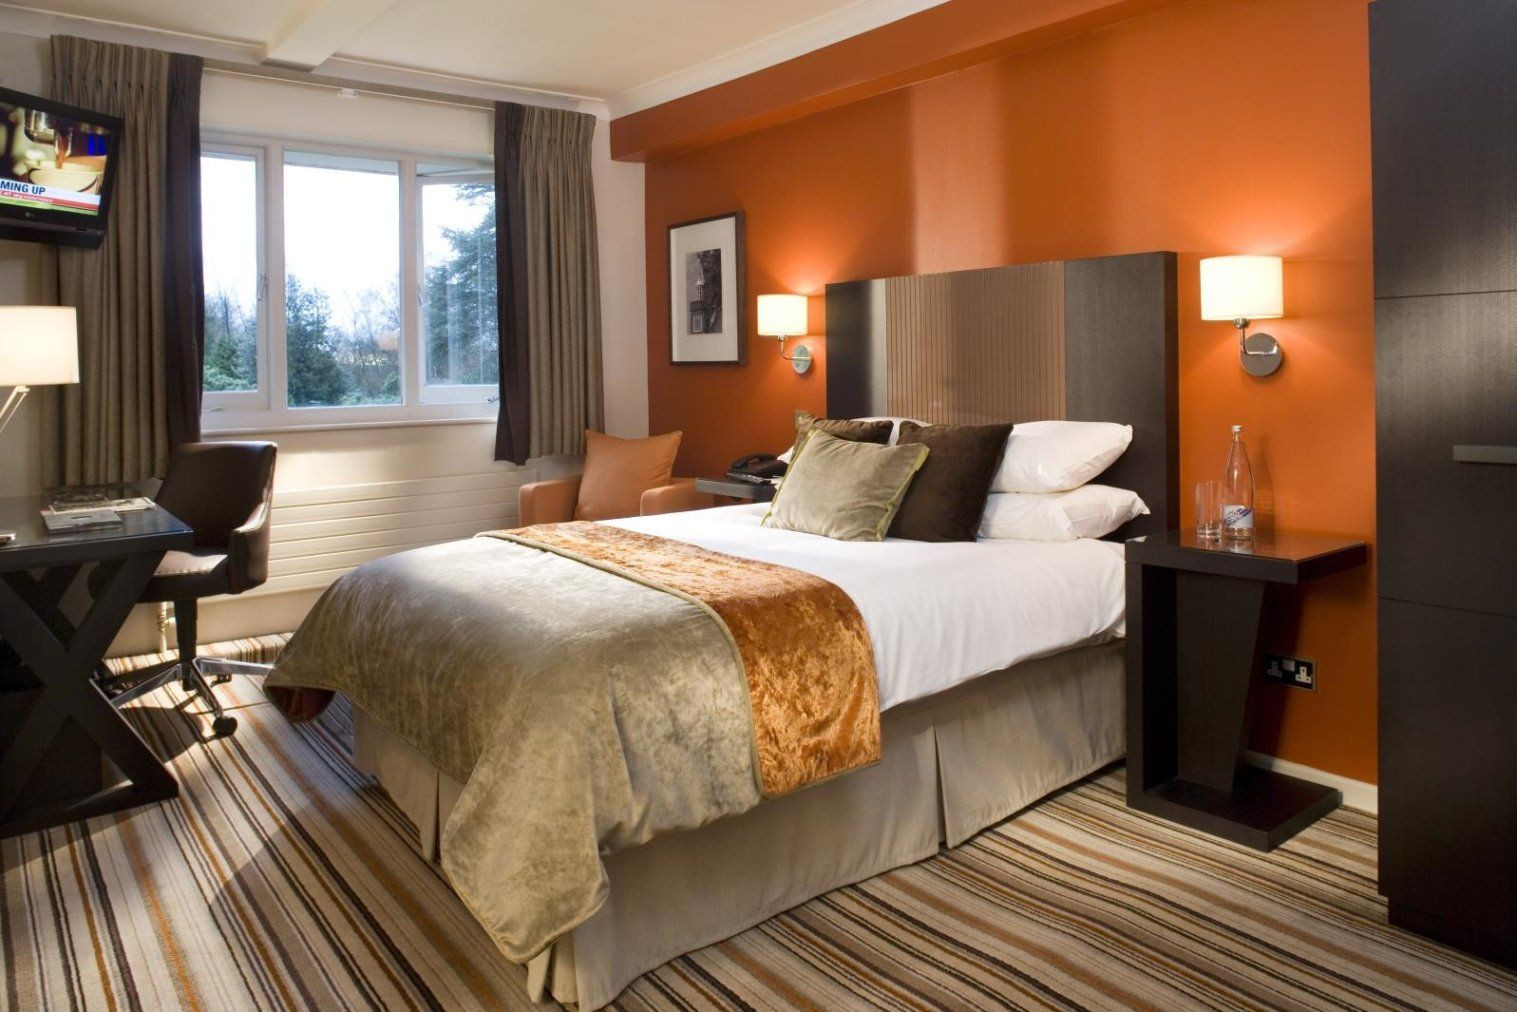 Mens Bedroom Paint Colors
 Fabulous Orange Bedroom Decorating Ideas and Designs With